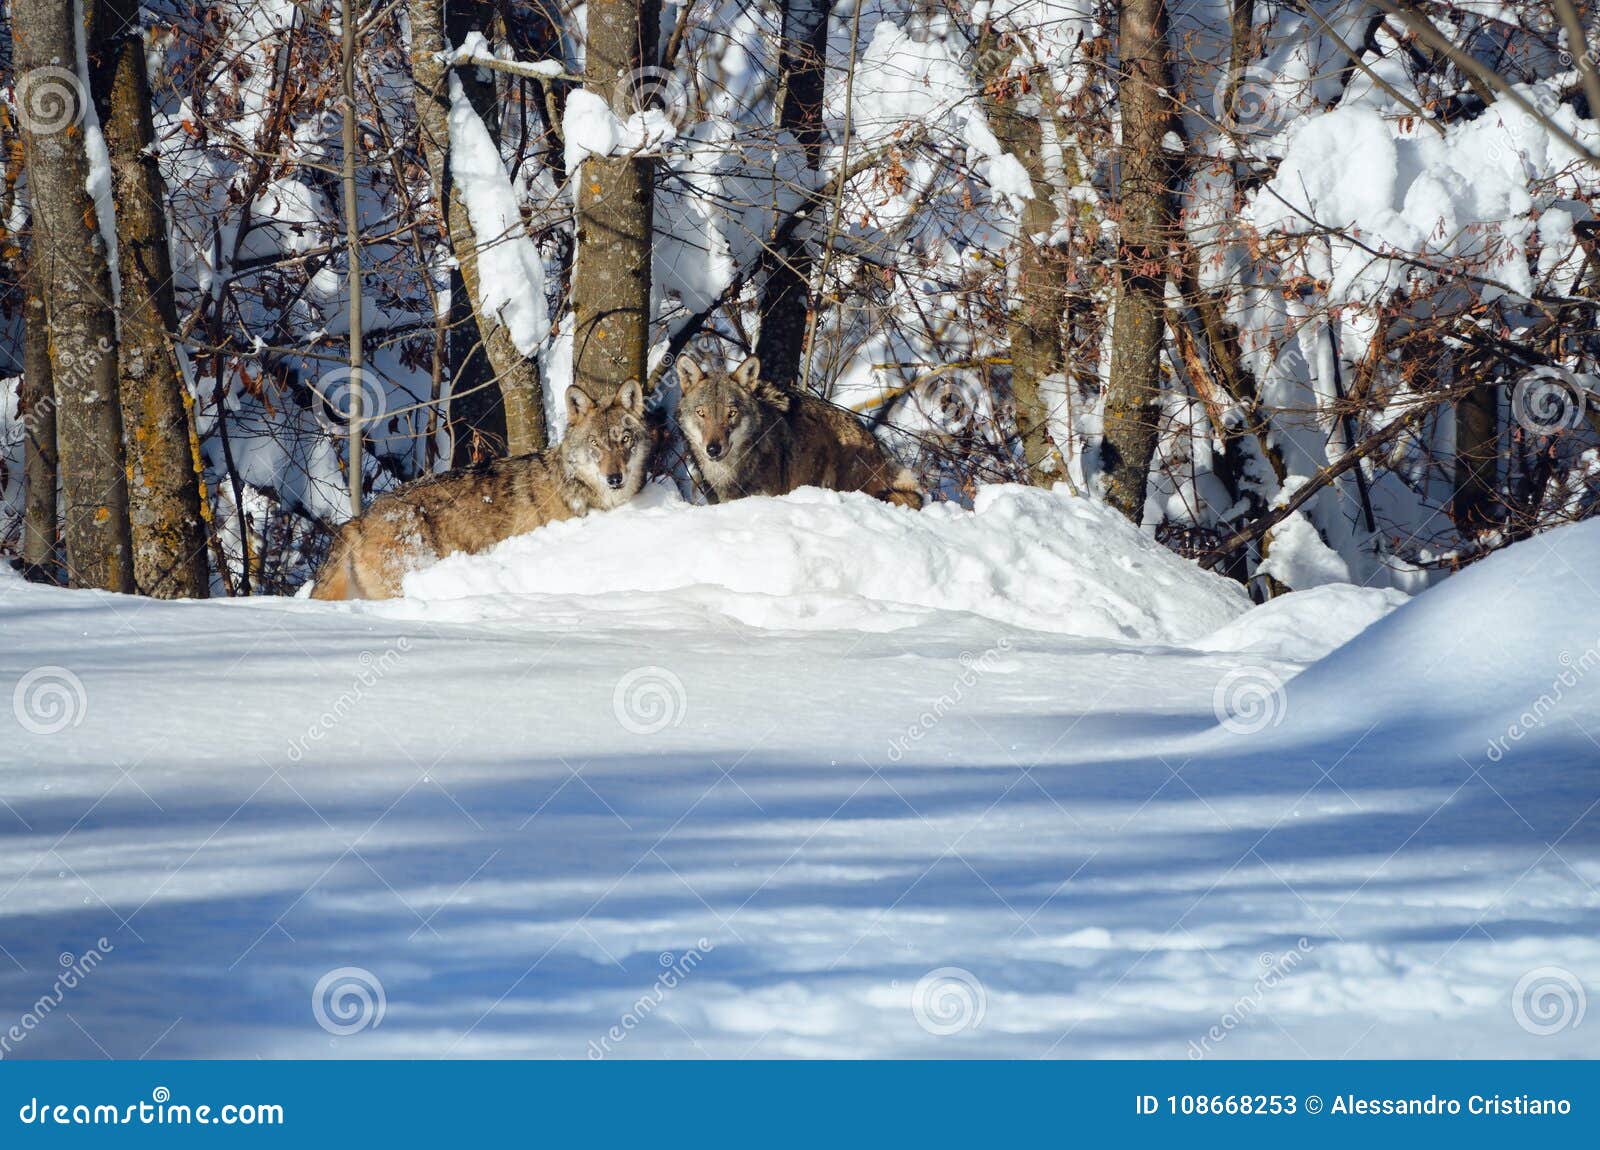 young italian wolf in the snow